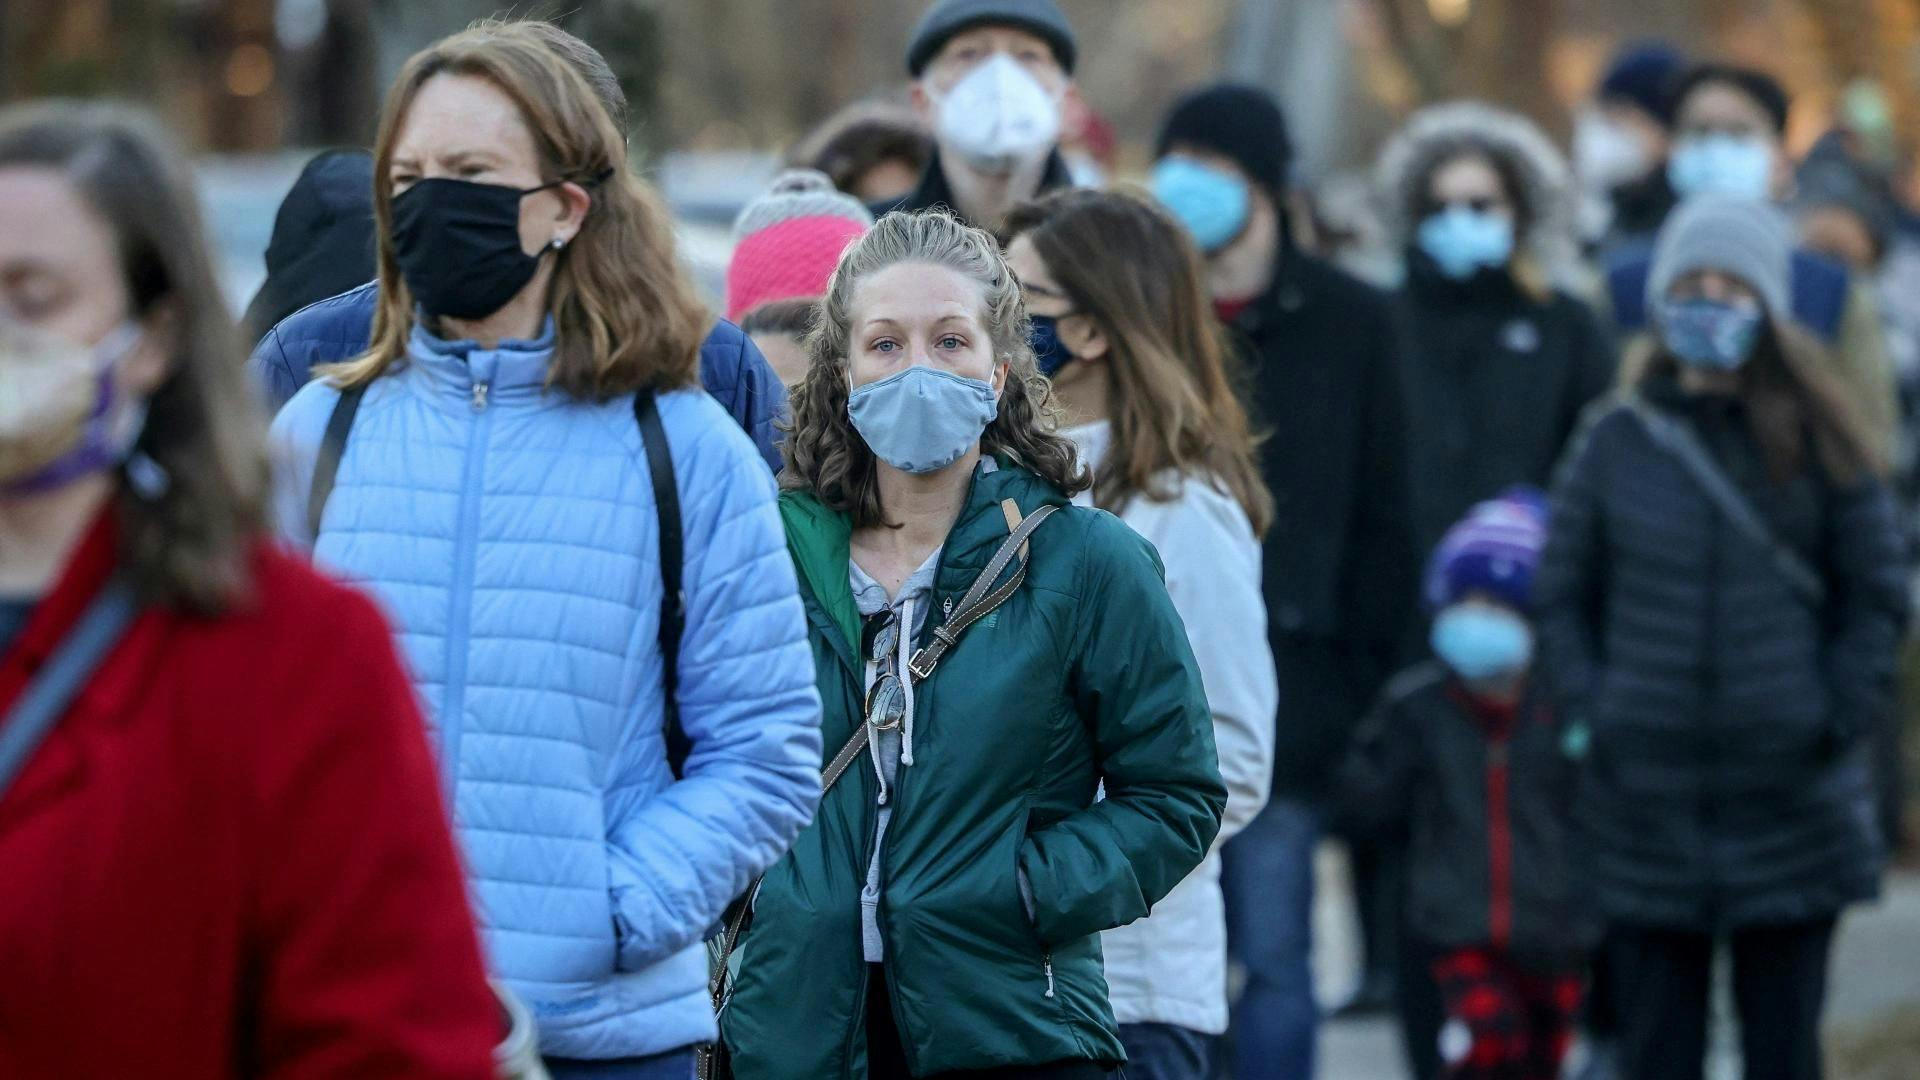 various people wearing masks due to the COVID-19 pandemic stock photo